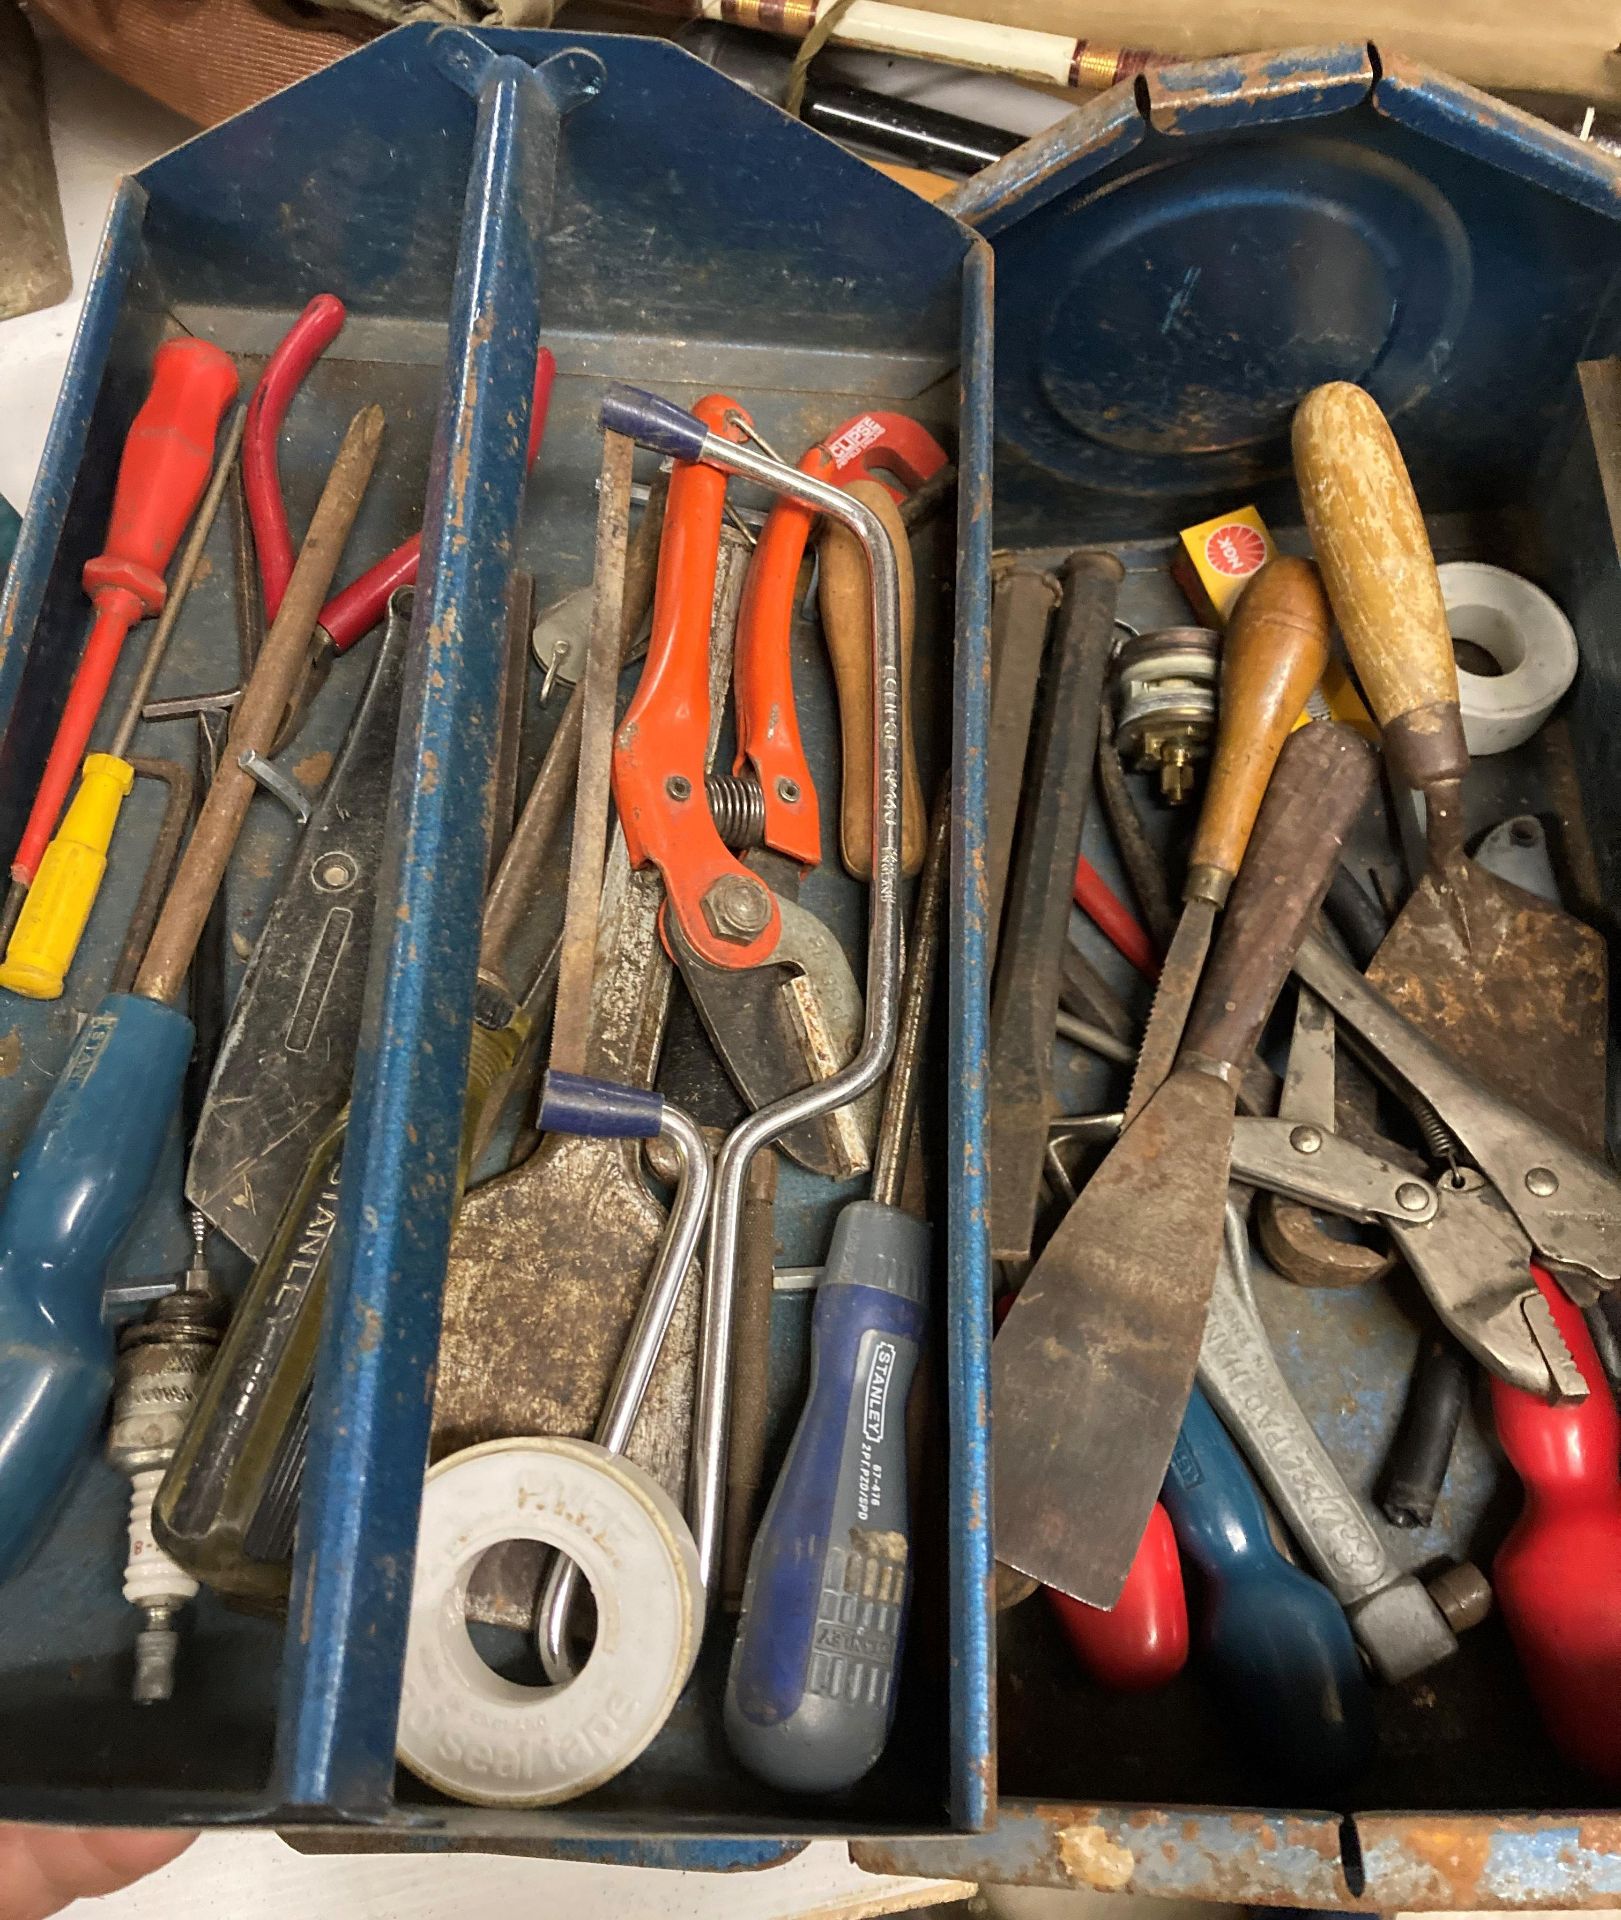 Contents to part of rack - two metal tool boxes and assorted hand tools, box saw, bit and brace, - Image 2 of 5